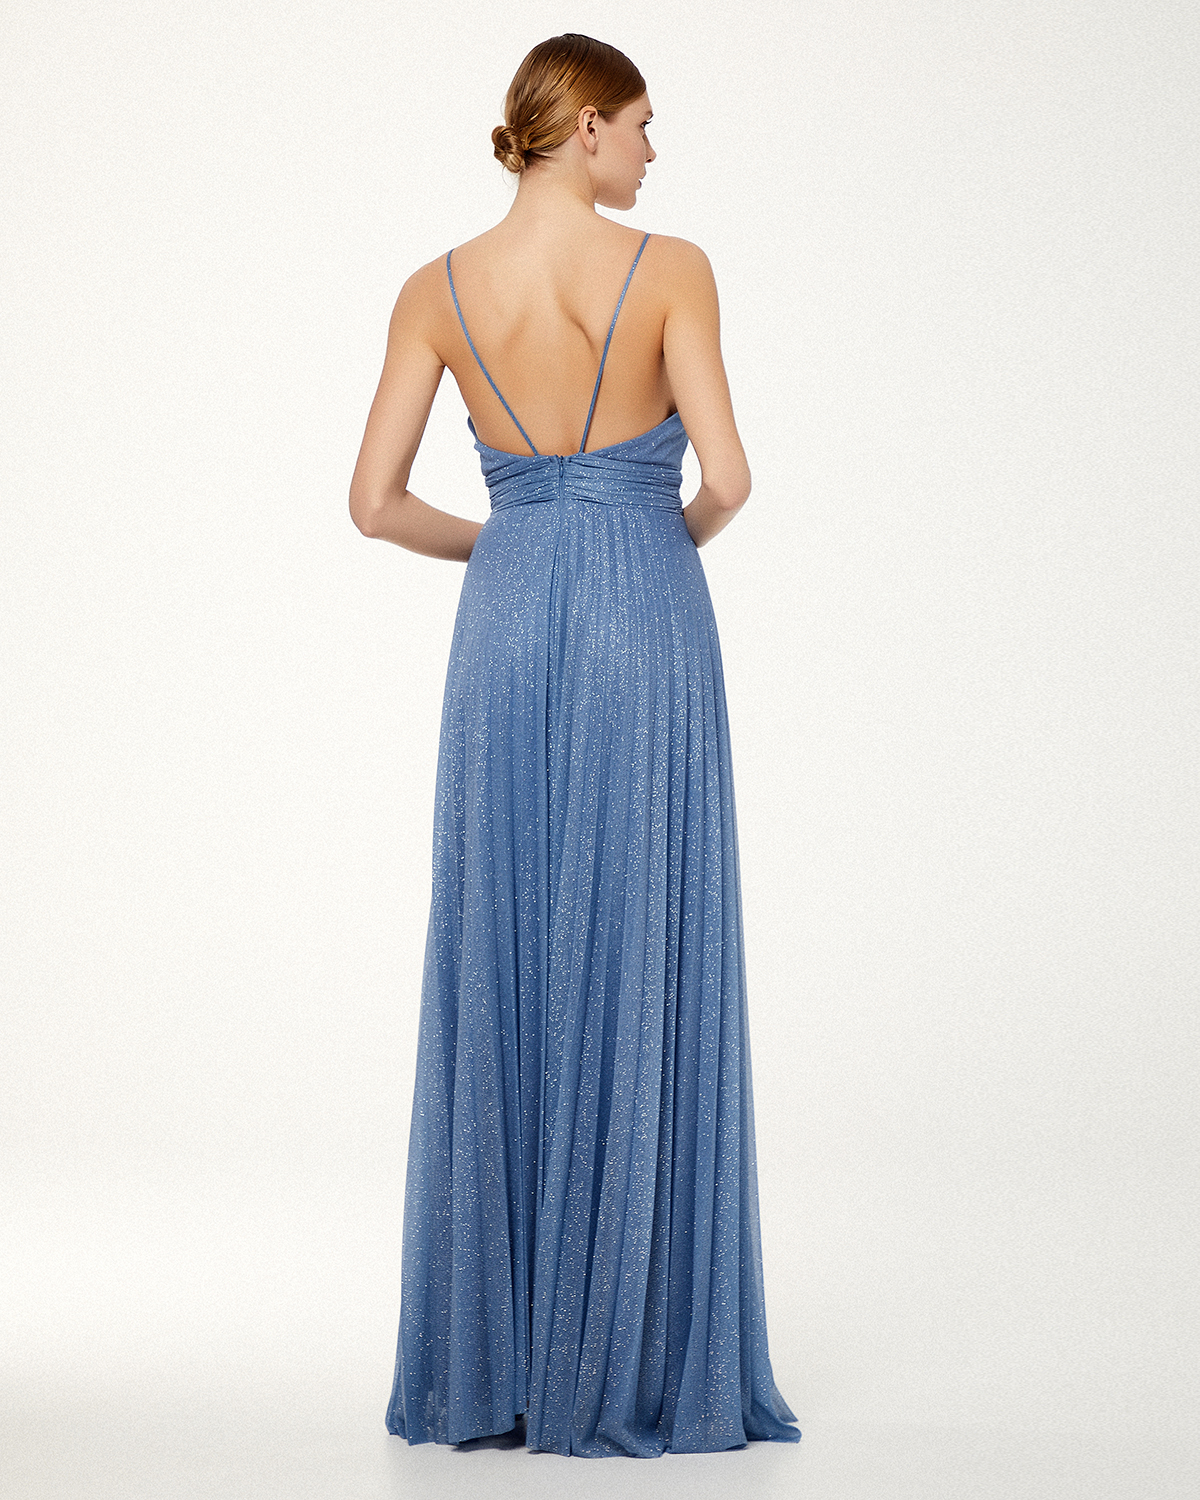 Cocktail Dresses / Long cocktail pleated dress with shining fabric and straps